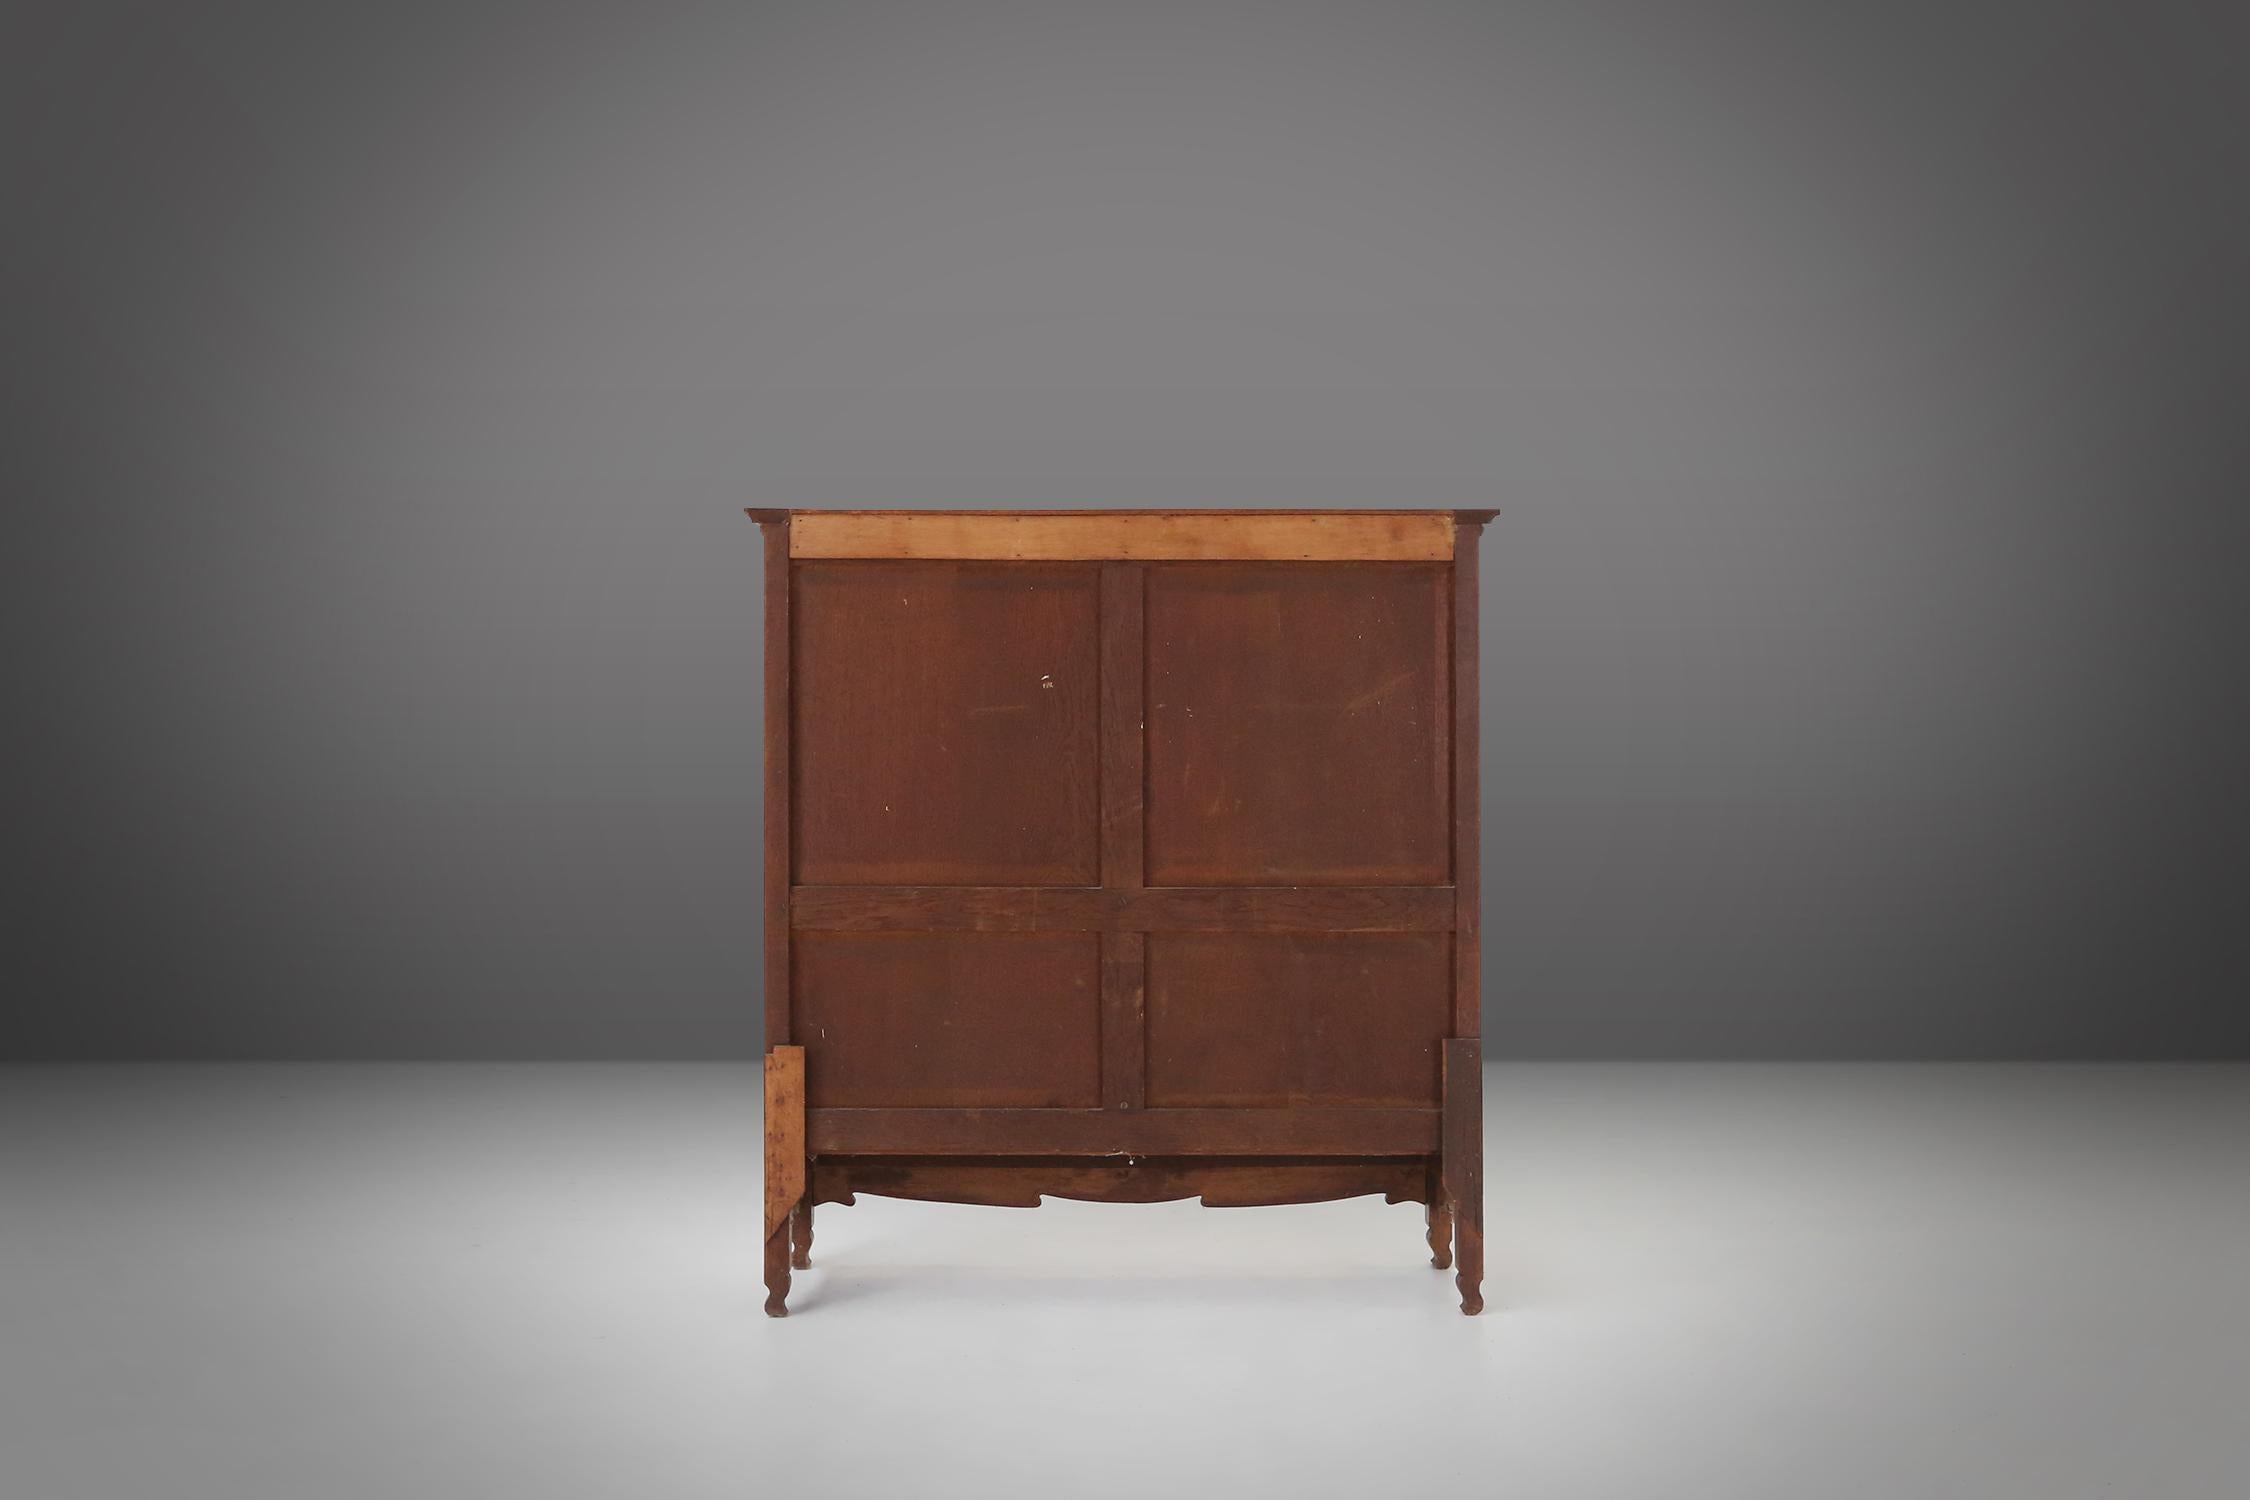 Remarkable Art Nouveau cabinet in oak with green glass door, France, 1910 For Sale 12